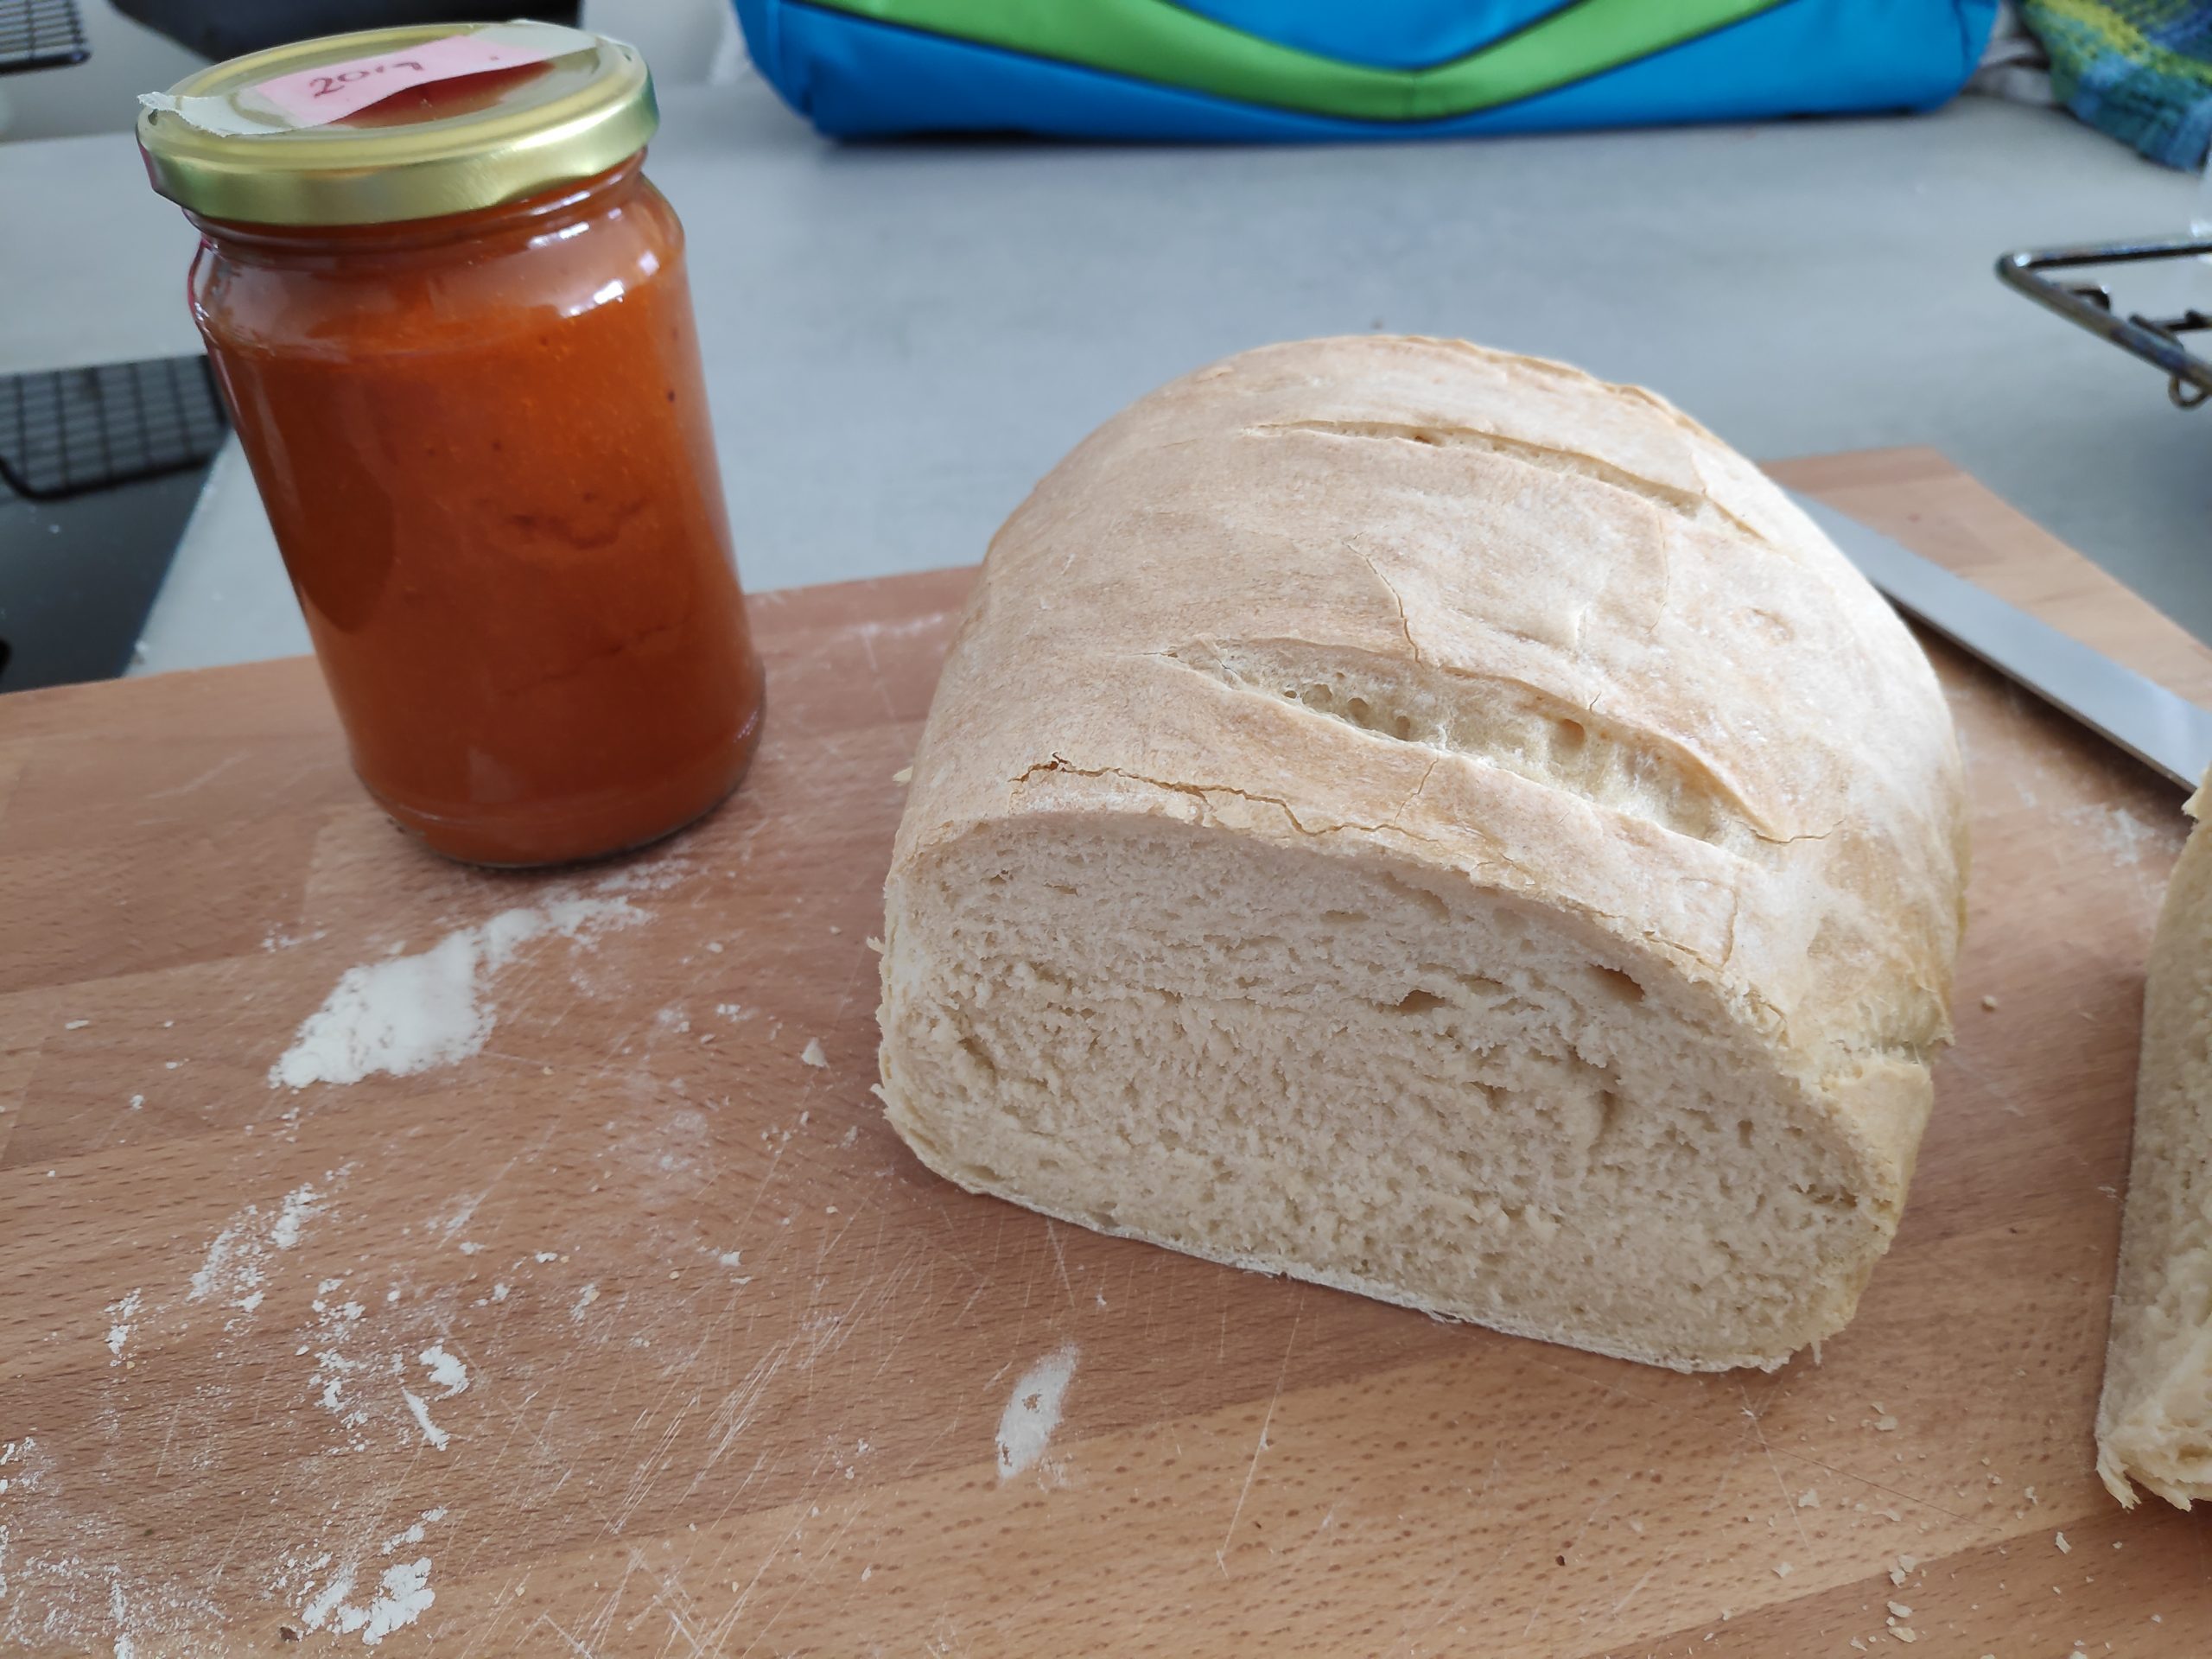 I actually baked my own bread which went great against homemade marmalade.